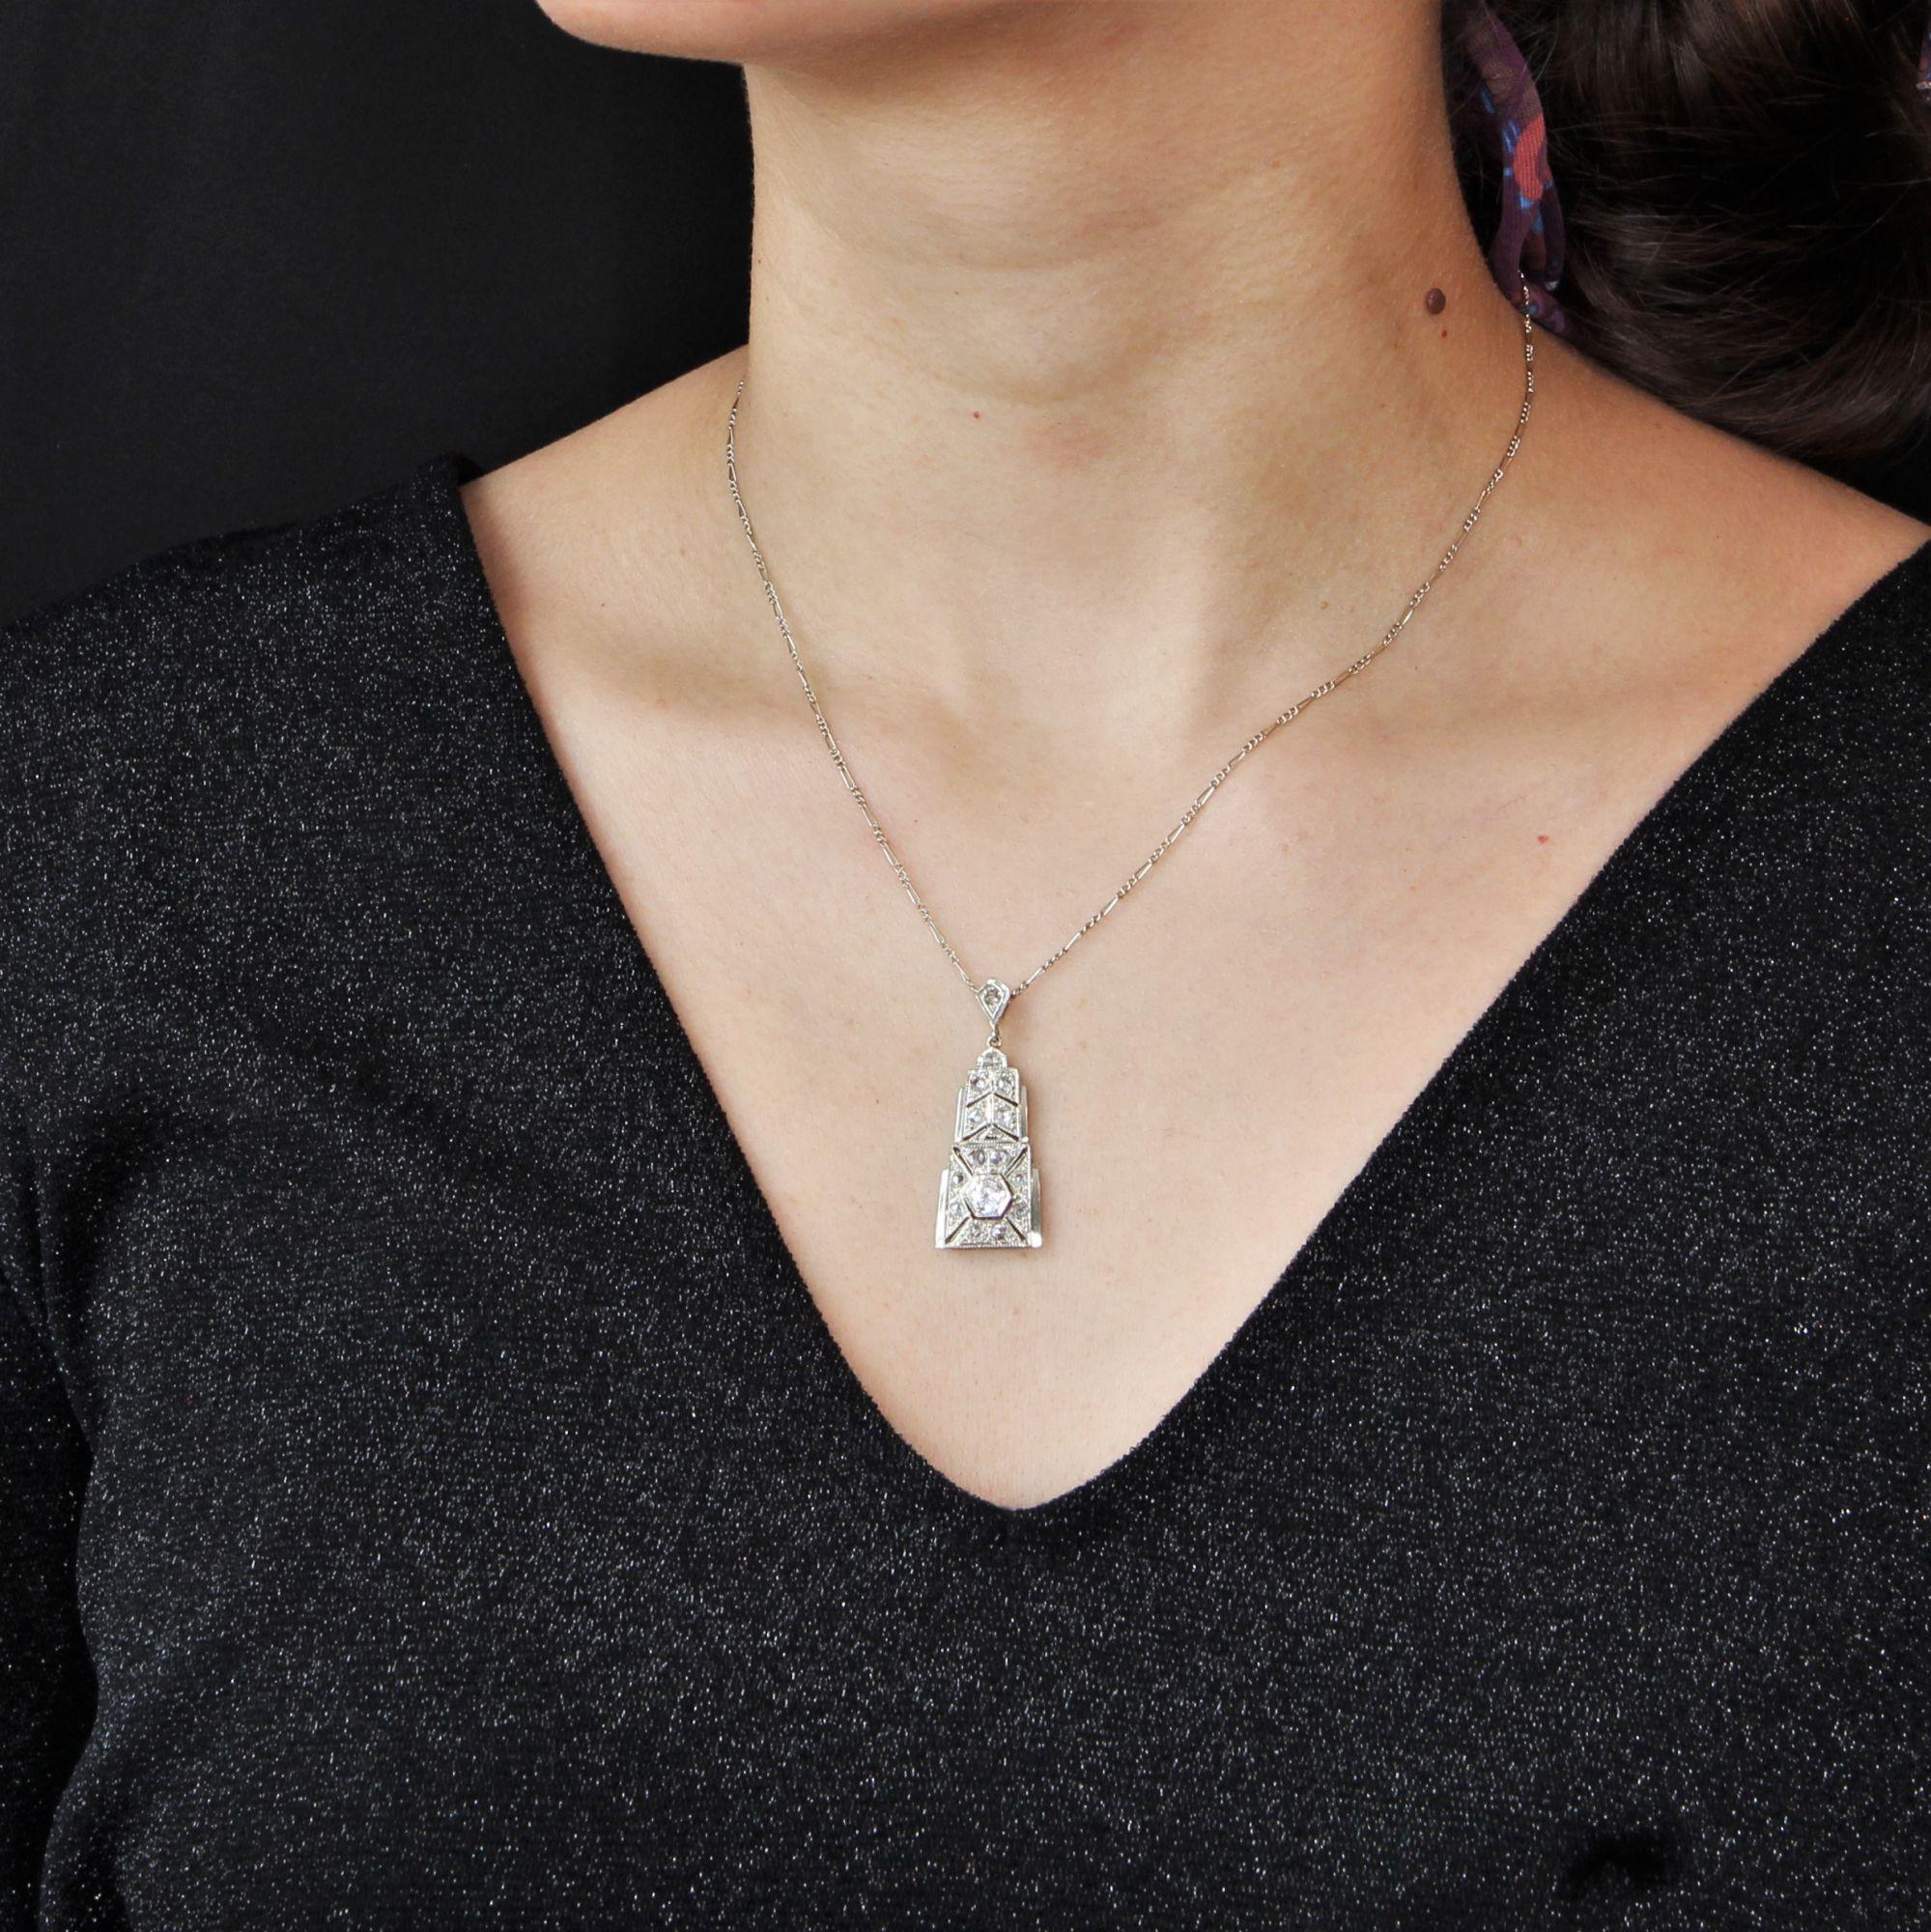 Pendant in 18 karat white gold, eagle head hallmark.
Of geometrical shape, this antique pendant has an openwork decoration of grainetis set with rose- cut diamonds, the most important is an antique brilliant- cut diamond. The chain is a thin oval